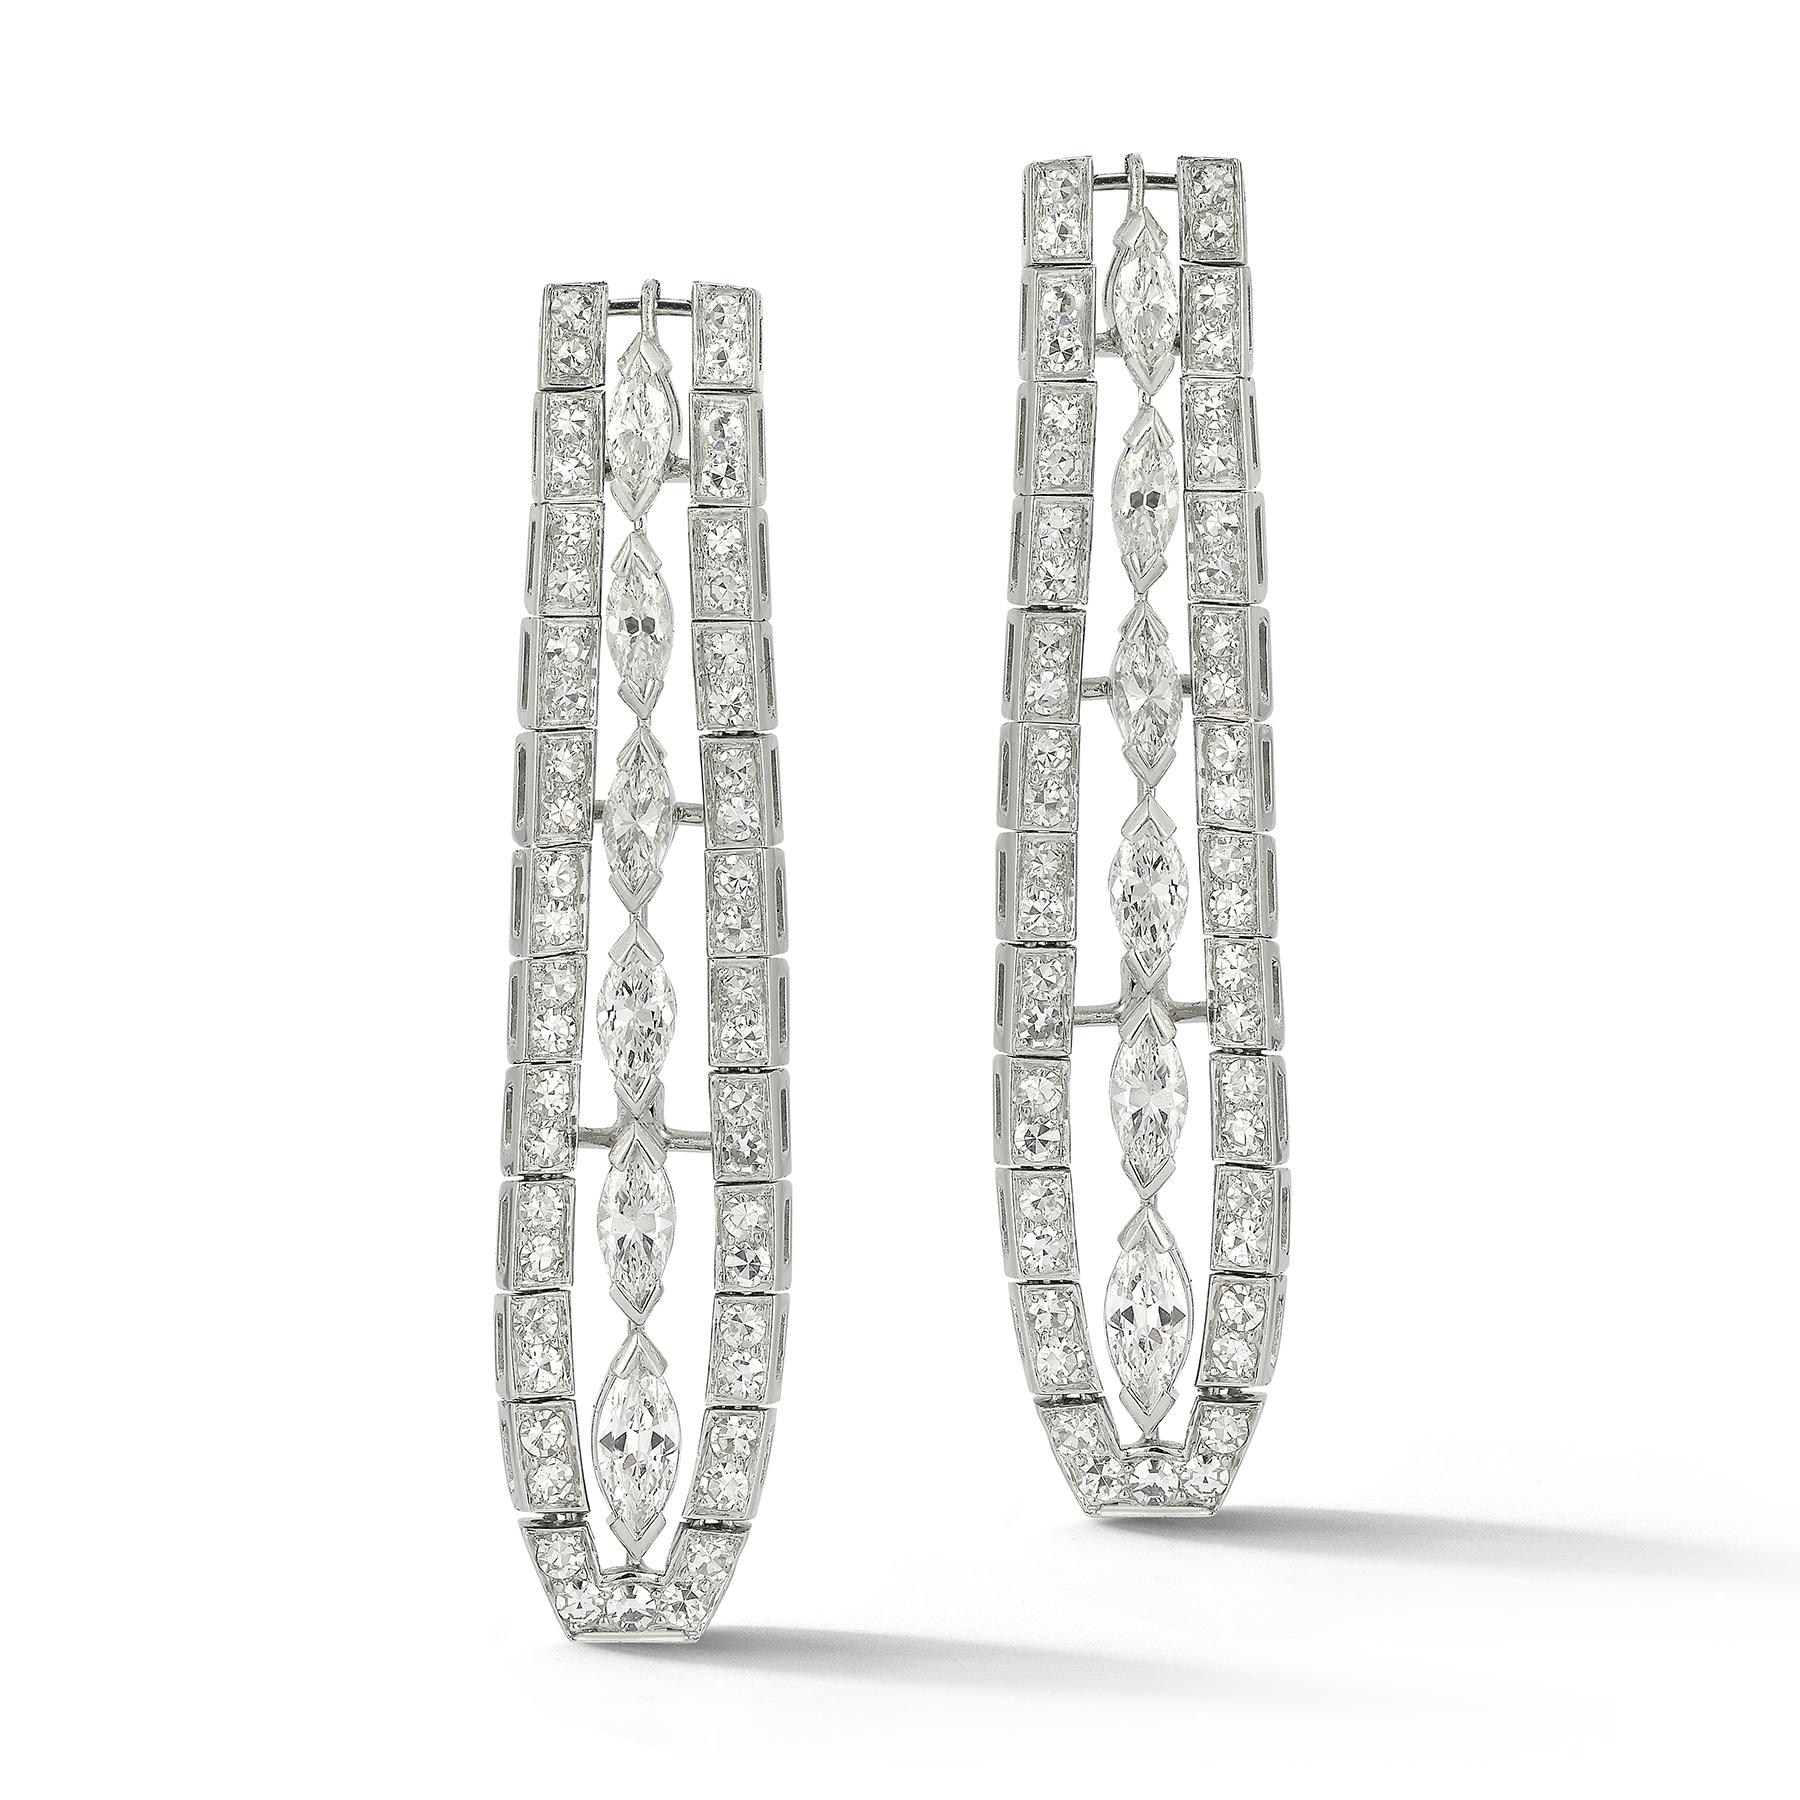 Art Deco Marquise Diamond Earrings 

Diamond Weight: approximately 7.00 cts 

12 marquise cut diamonds surrounded by 98 round cut diamonds set in platinum.

Back Type: Push Back

Measurements: 2.05